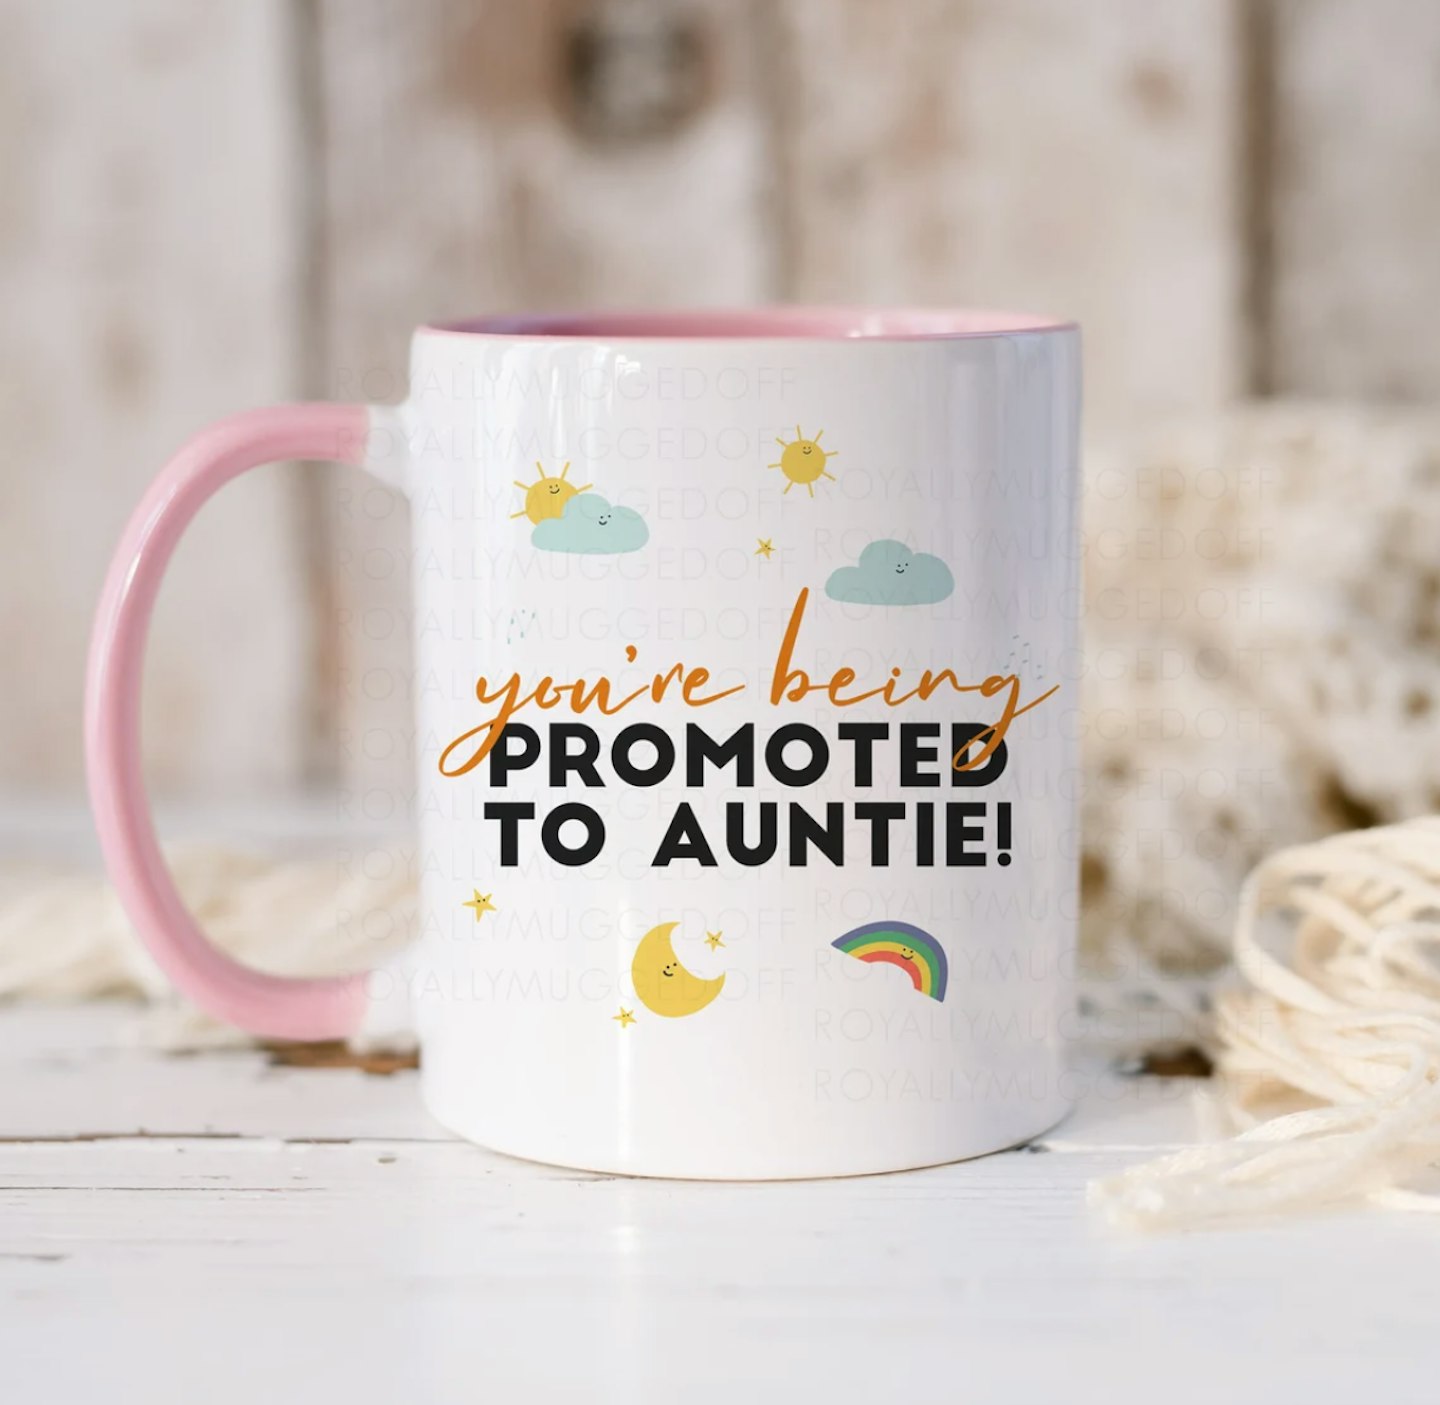 Promoted to Auntie